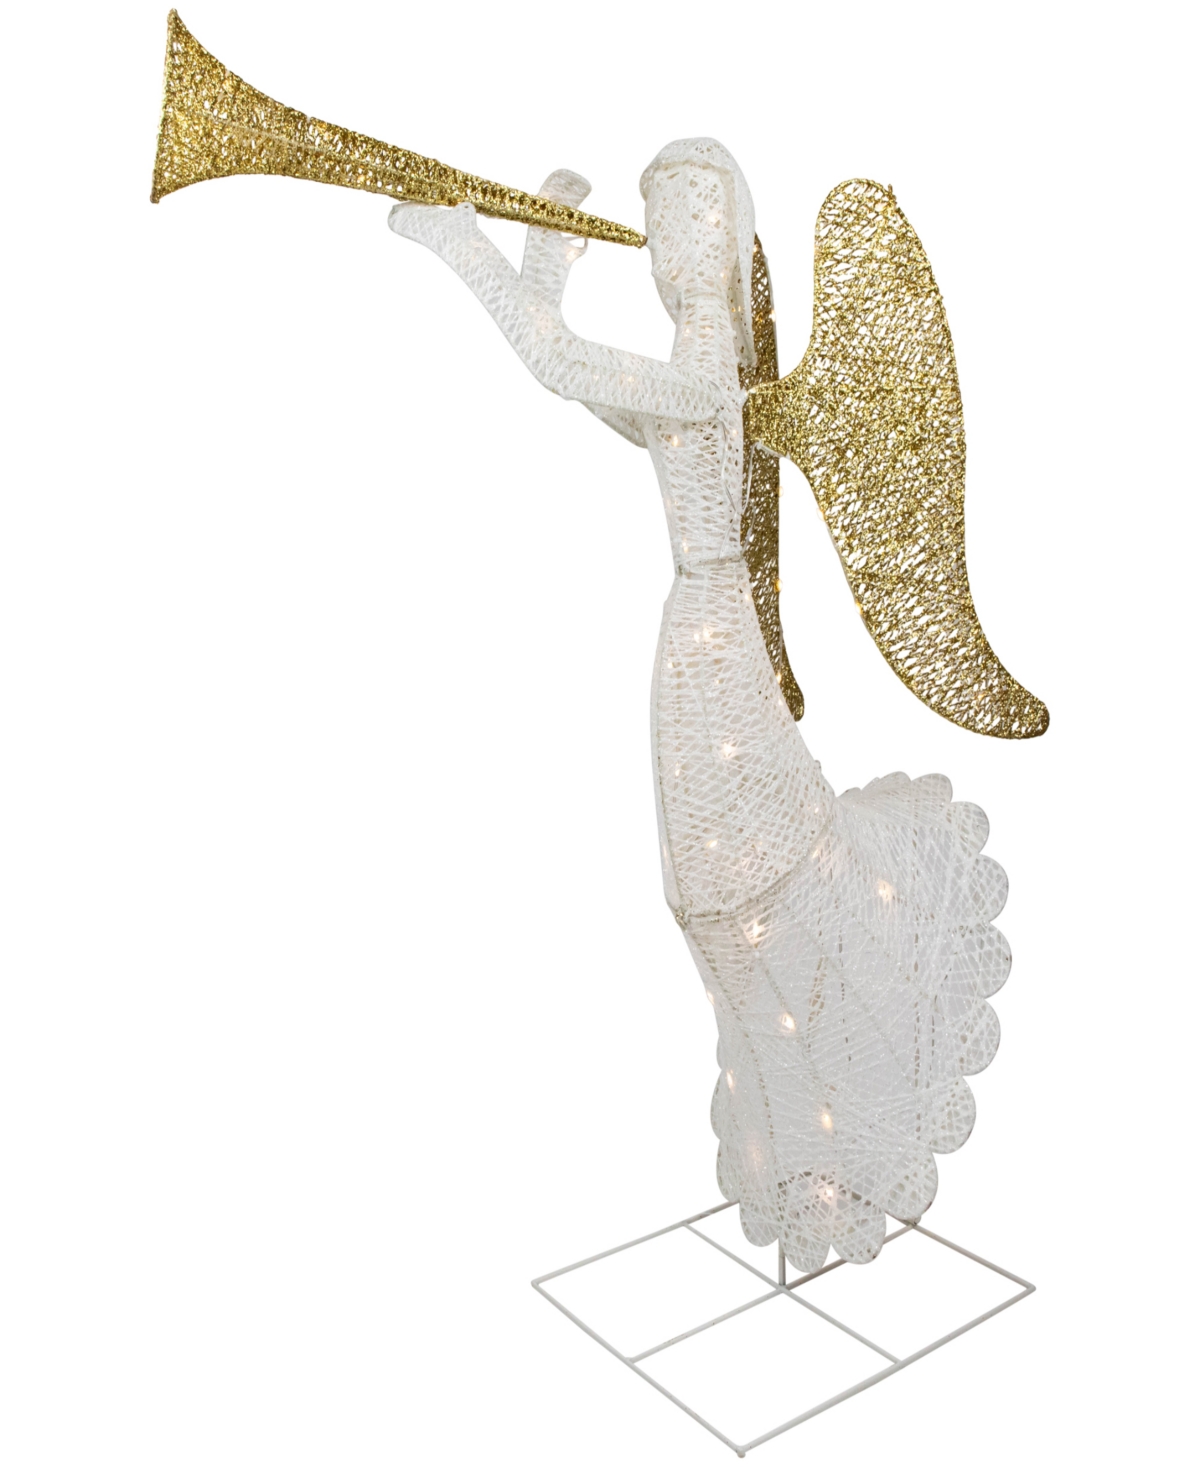 Shop Northlight 48" Light Emitting Diode (led) Lighted Trumpeting Angel Outdoor Christmas Outdoor Decoration In Silver